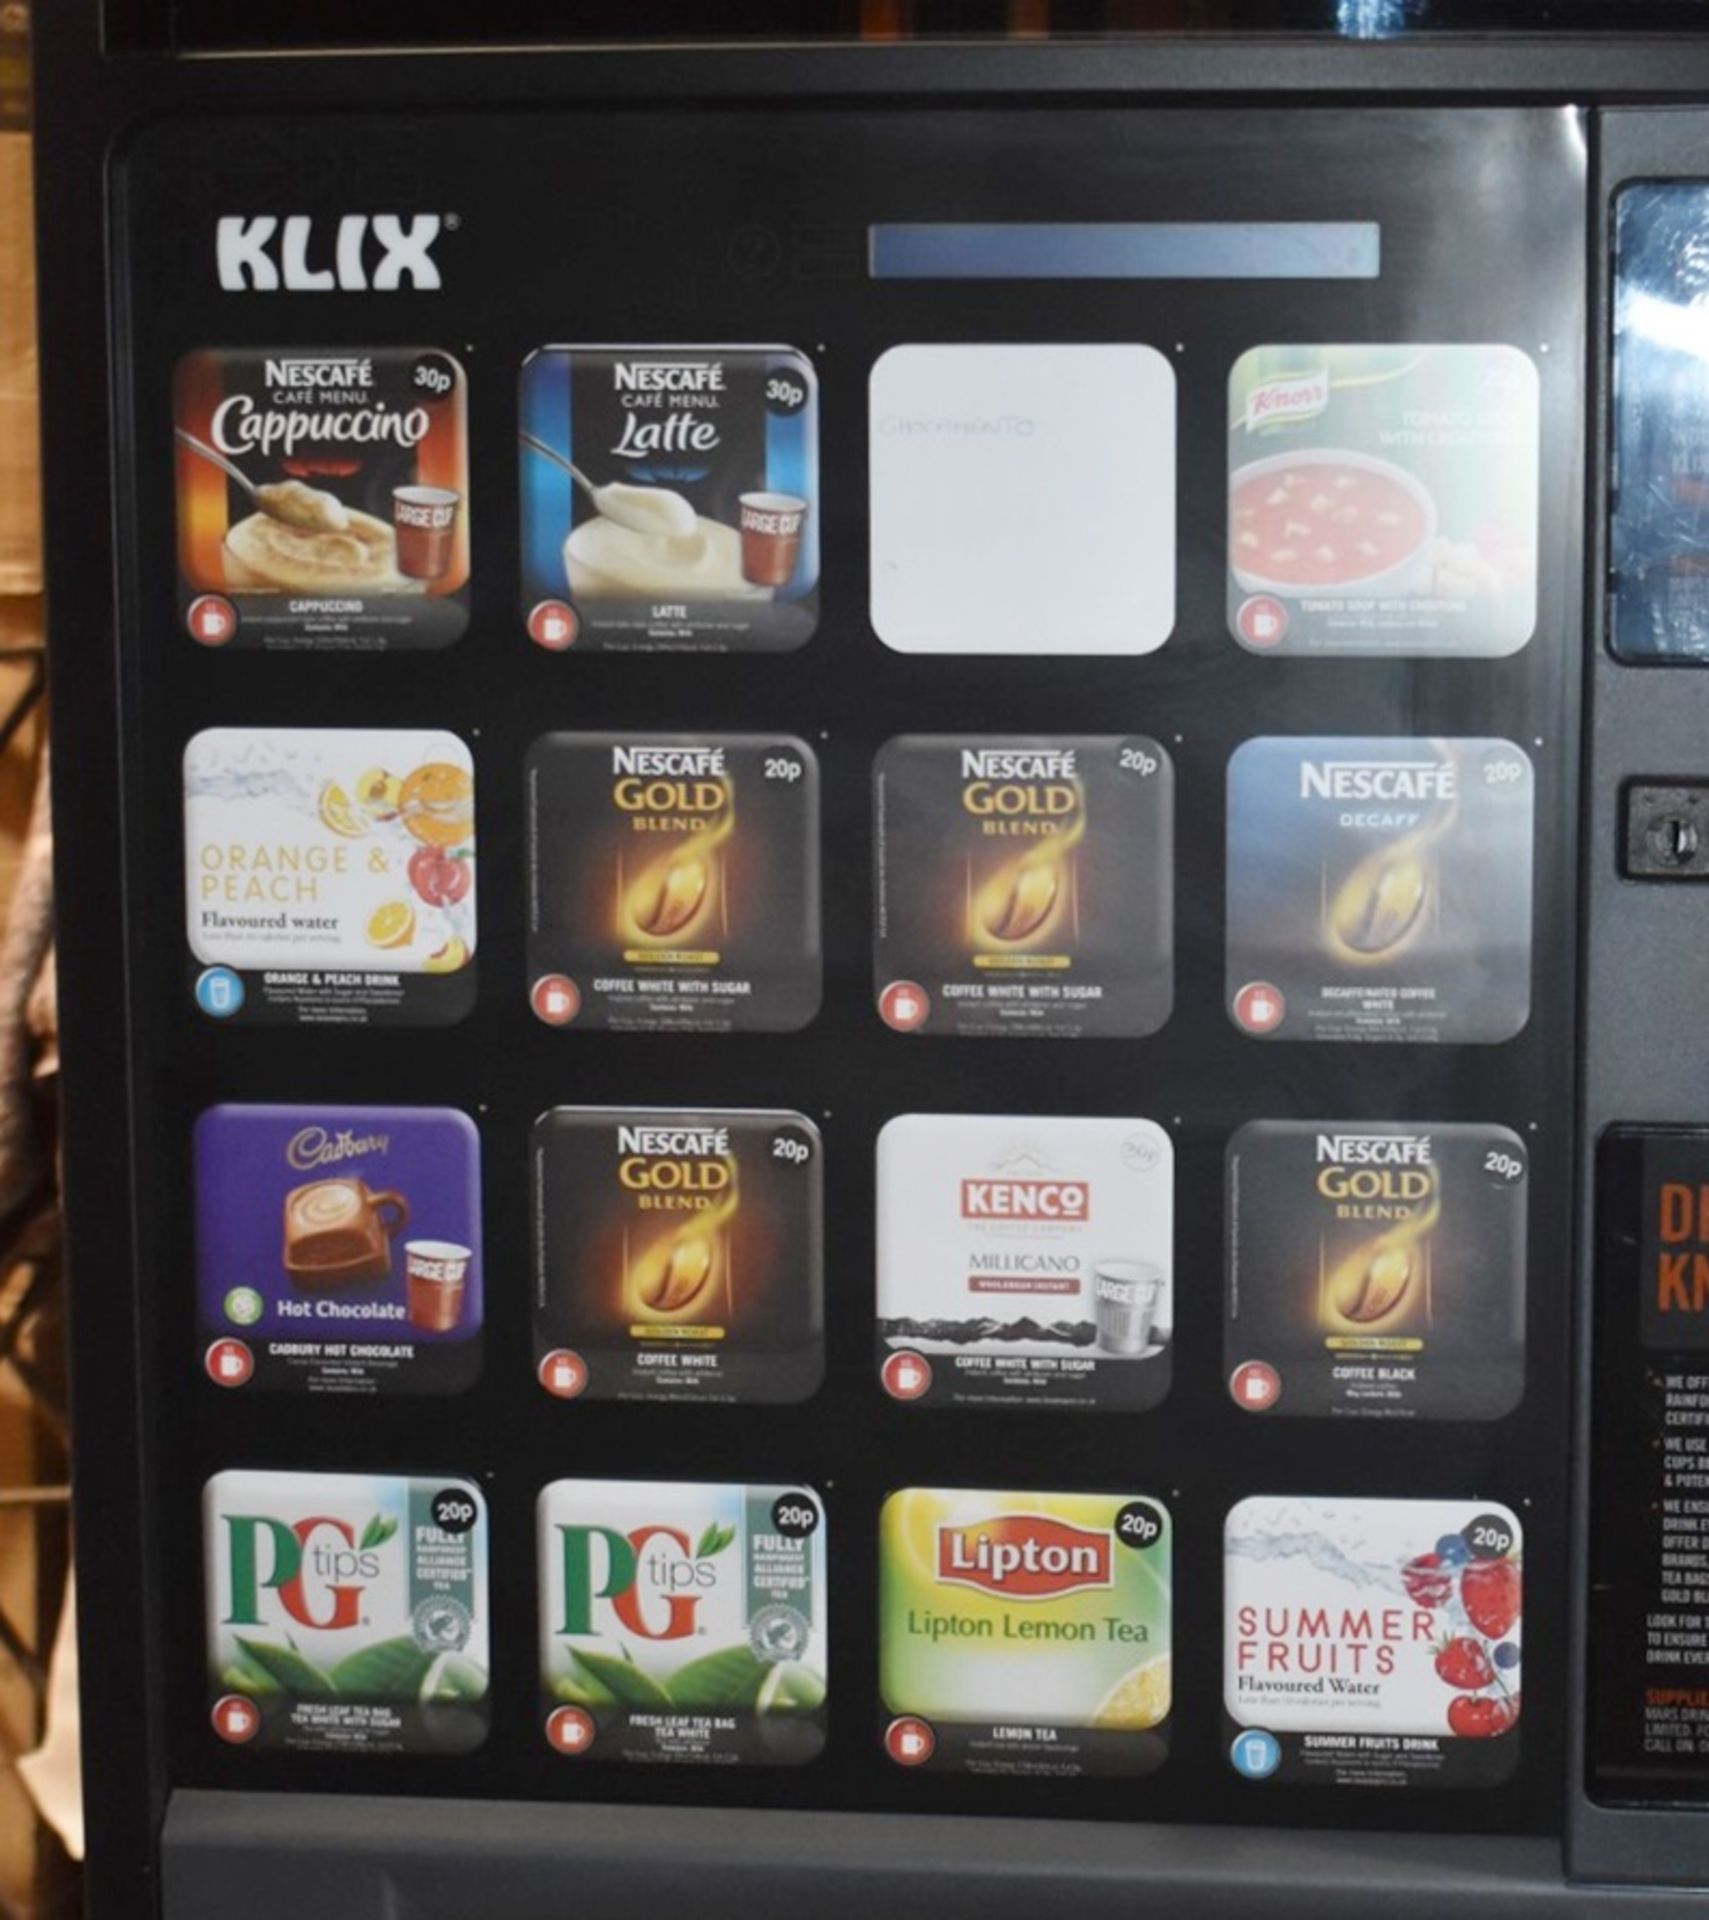 1 x Klix Outlook Hot and Cold Drinks Vending Machine - 240v - CL232 - Ref: CCA120 - Location: Altrin - Image 7 of 15